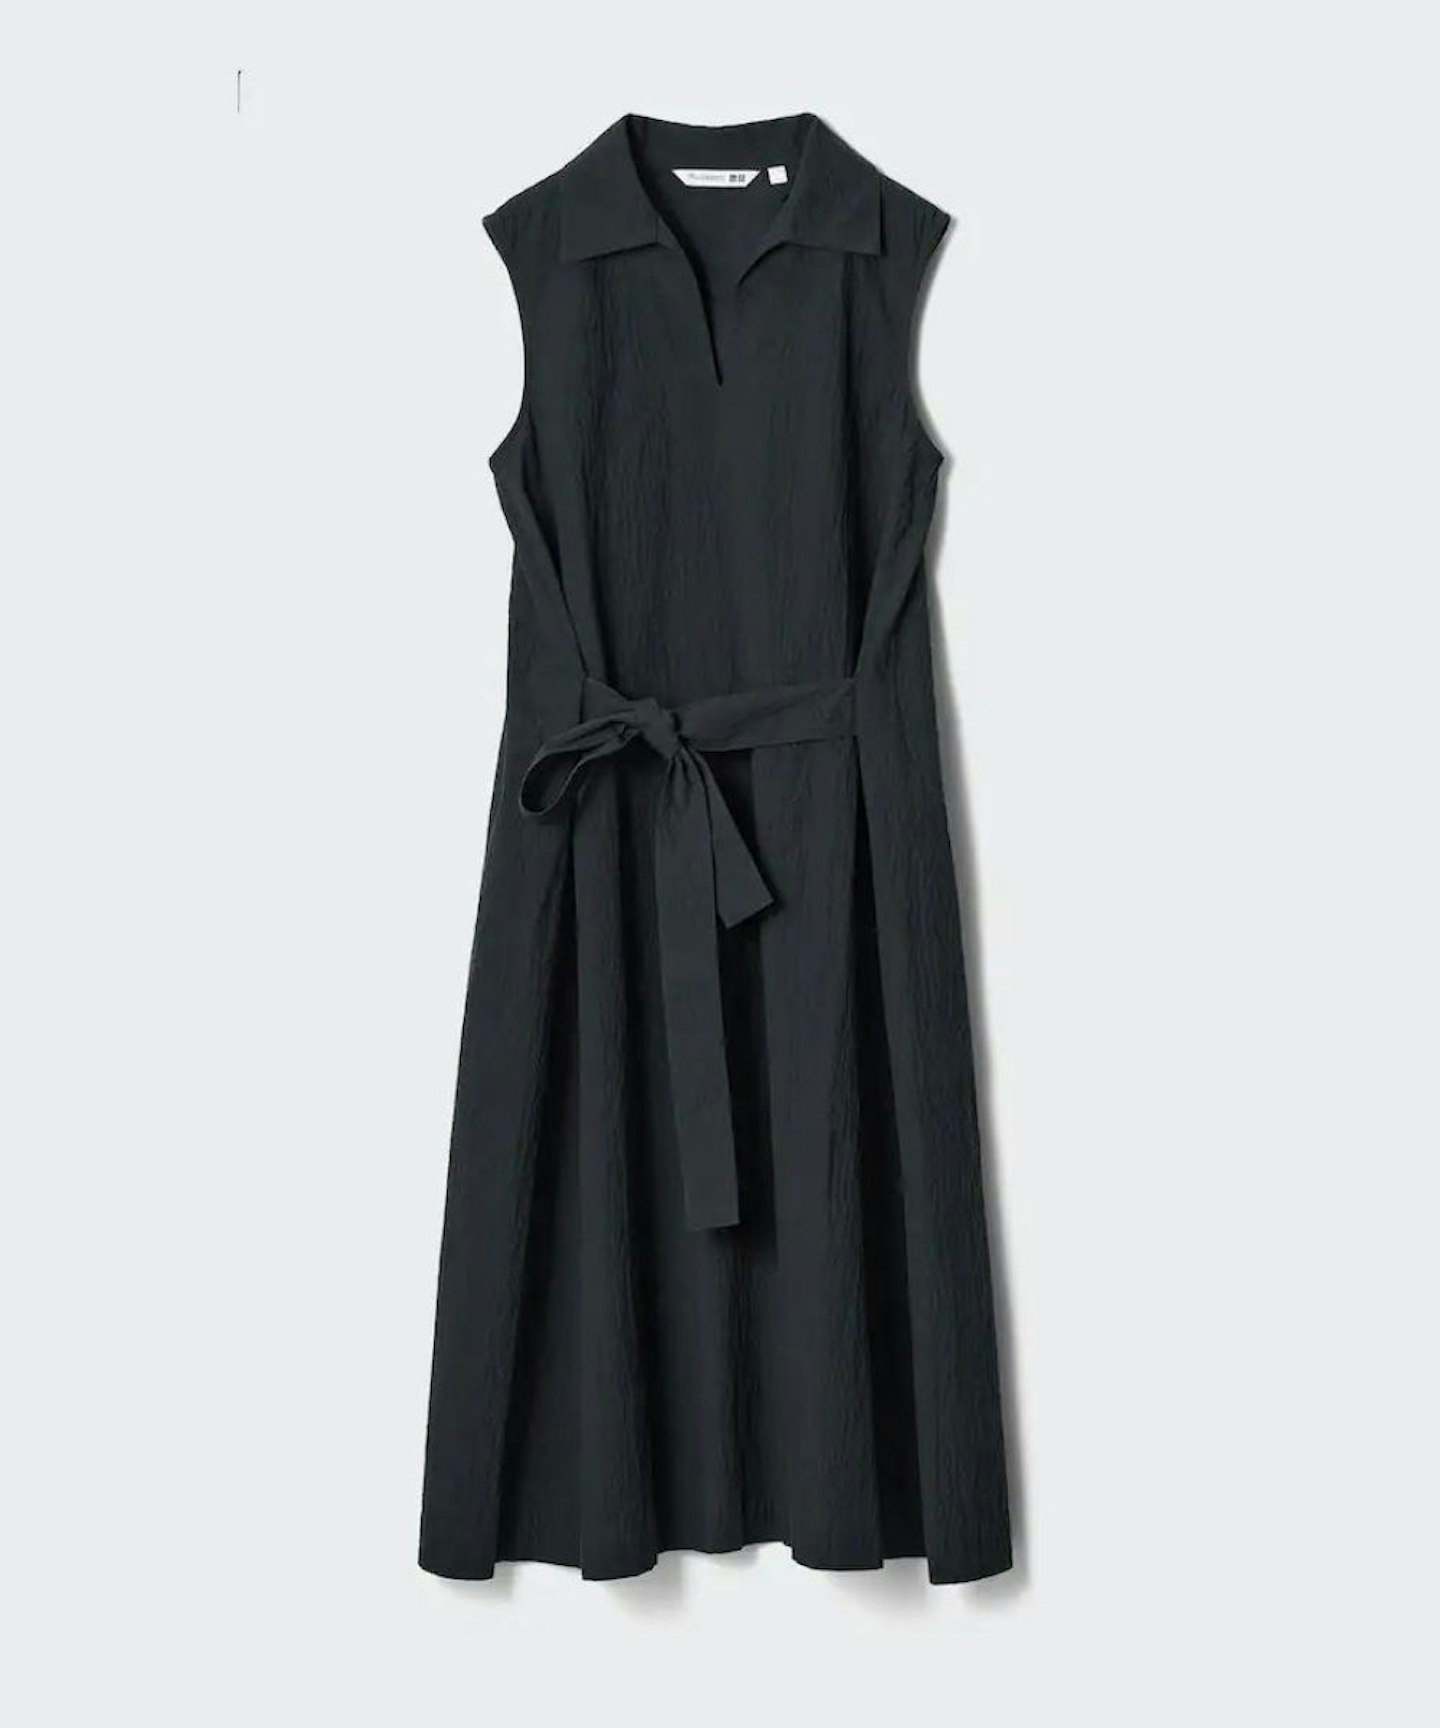 Uniqlo x JW Anderson Belted Sleeveless Dress